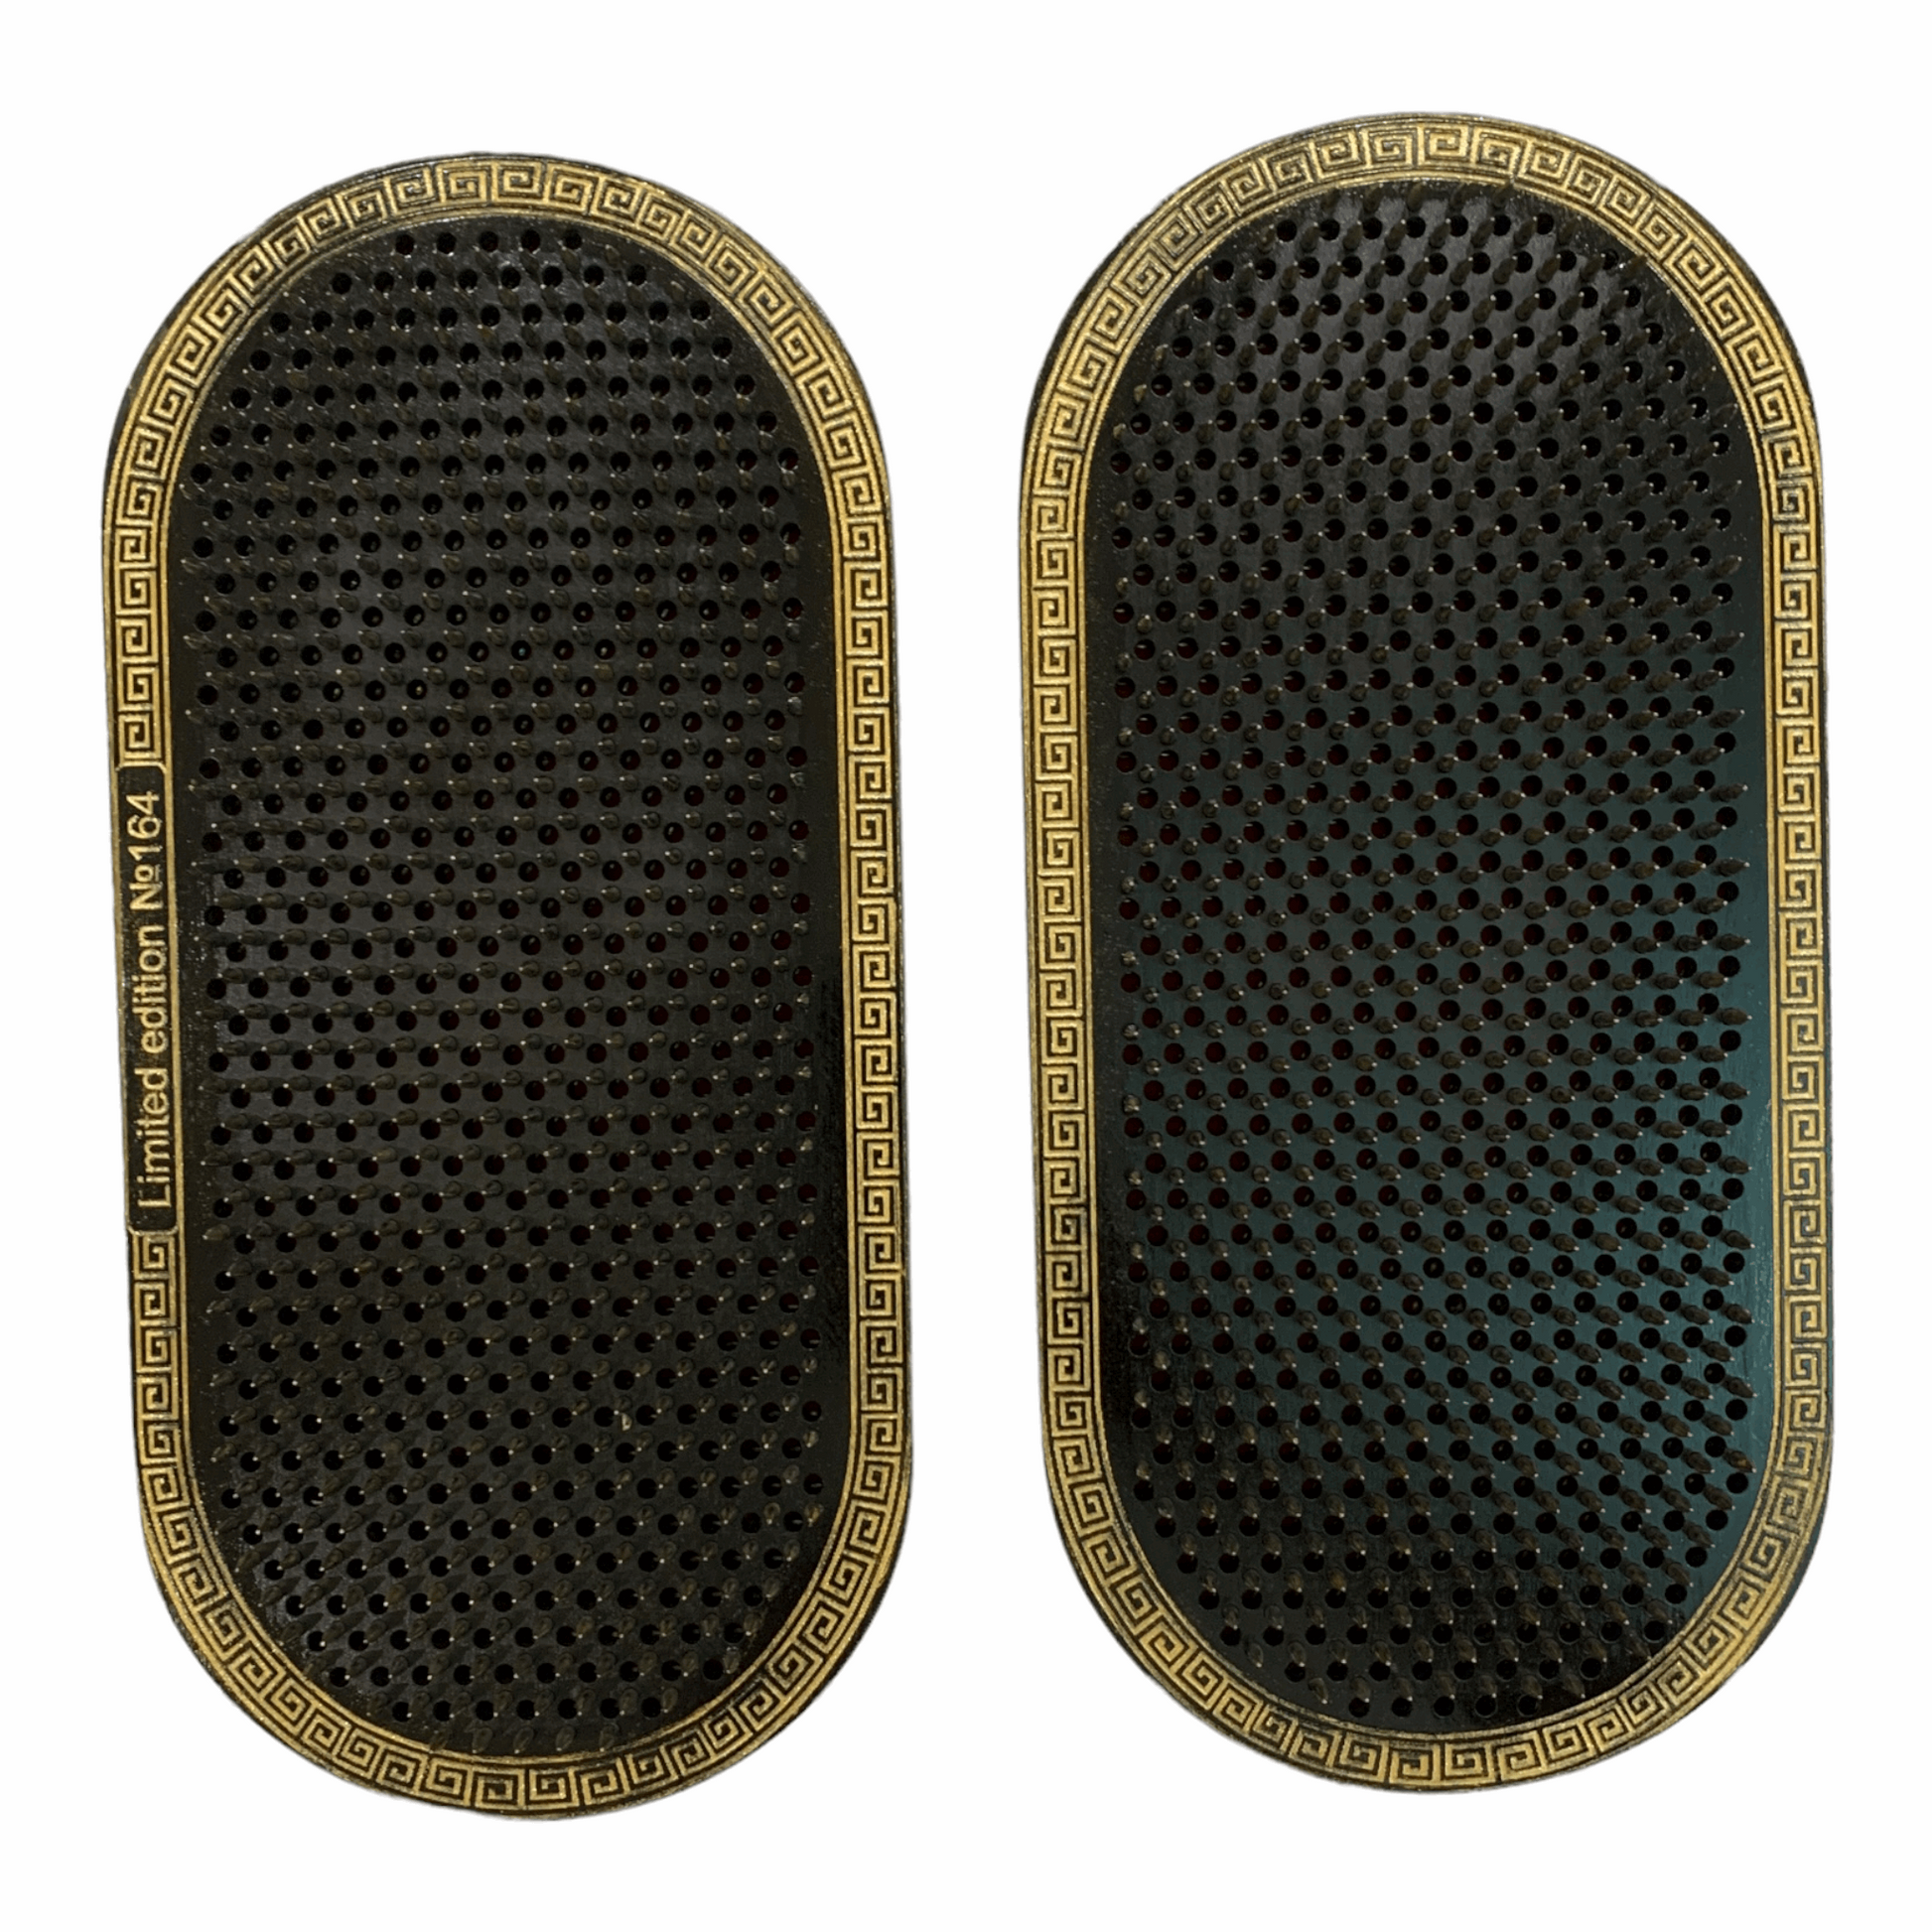 Rubber Sadhu Board with Ballistic nails bullets and forged steel, 8 mm